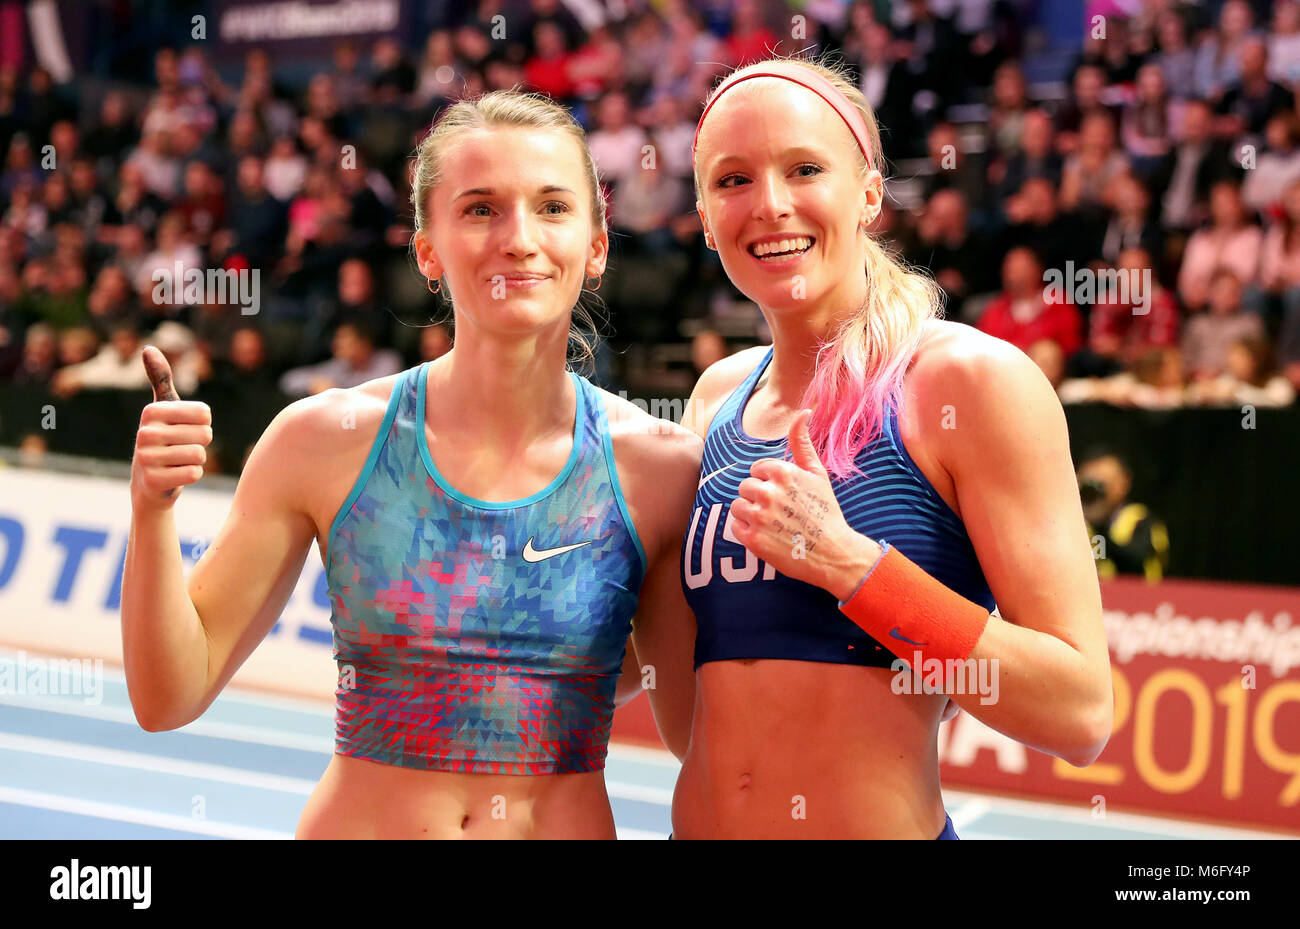 USA's Sandi Morris (right) and Authorised Neutral Athlete's Anzhelika Sidorova celebrate winning medels at the Woman's Pole Vault Final during day three of the 2018 IAAF Indoor World Championships at The Arena Birmingham. Stock Photo